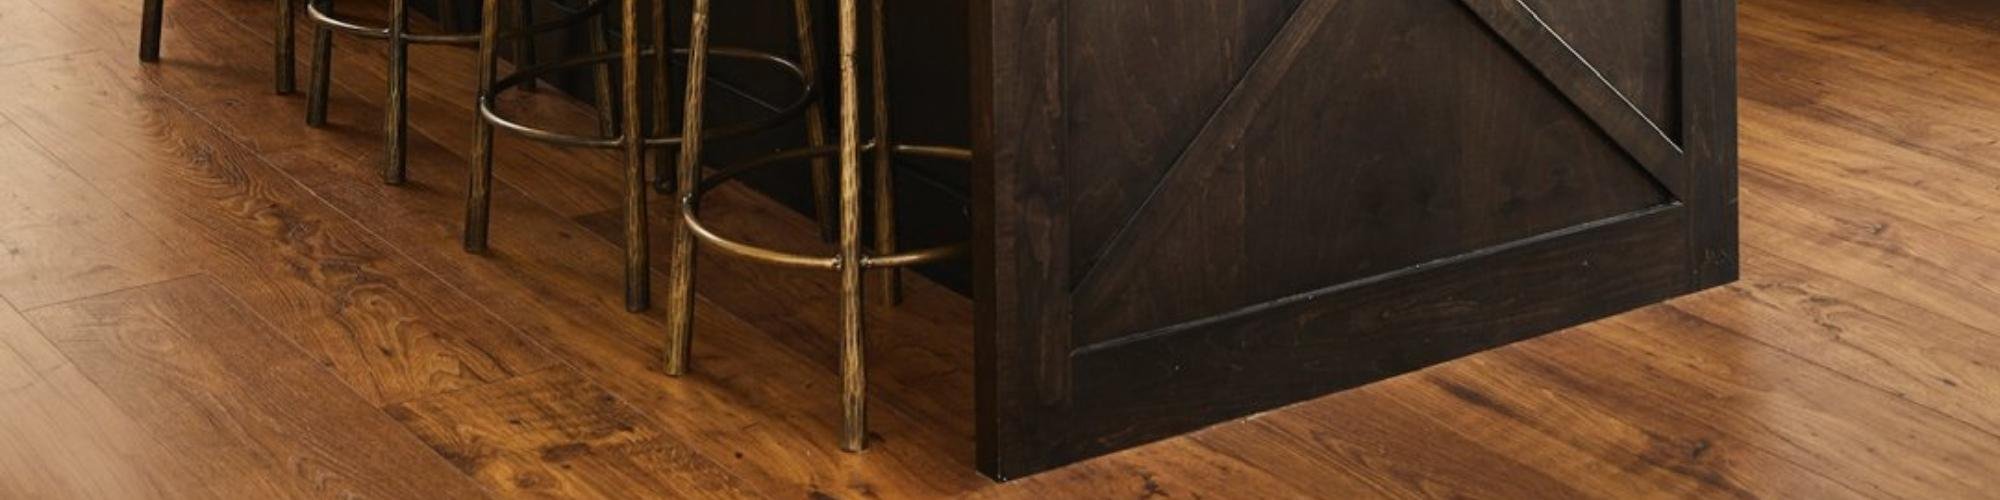 See our wide variety of hardwood flooring with Jason's Carpet & Tile